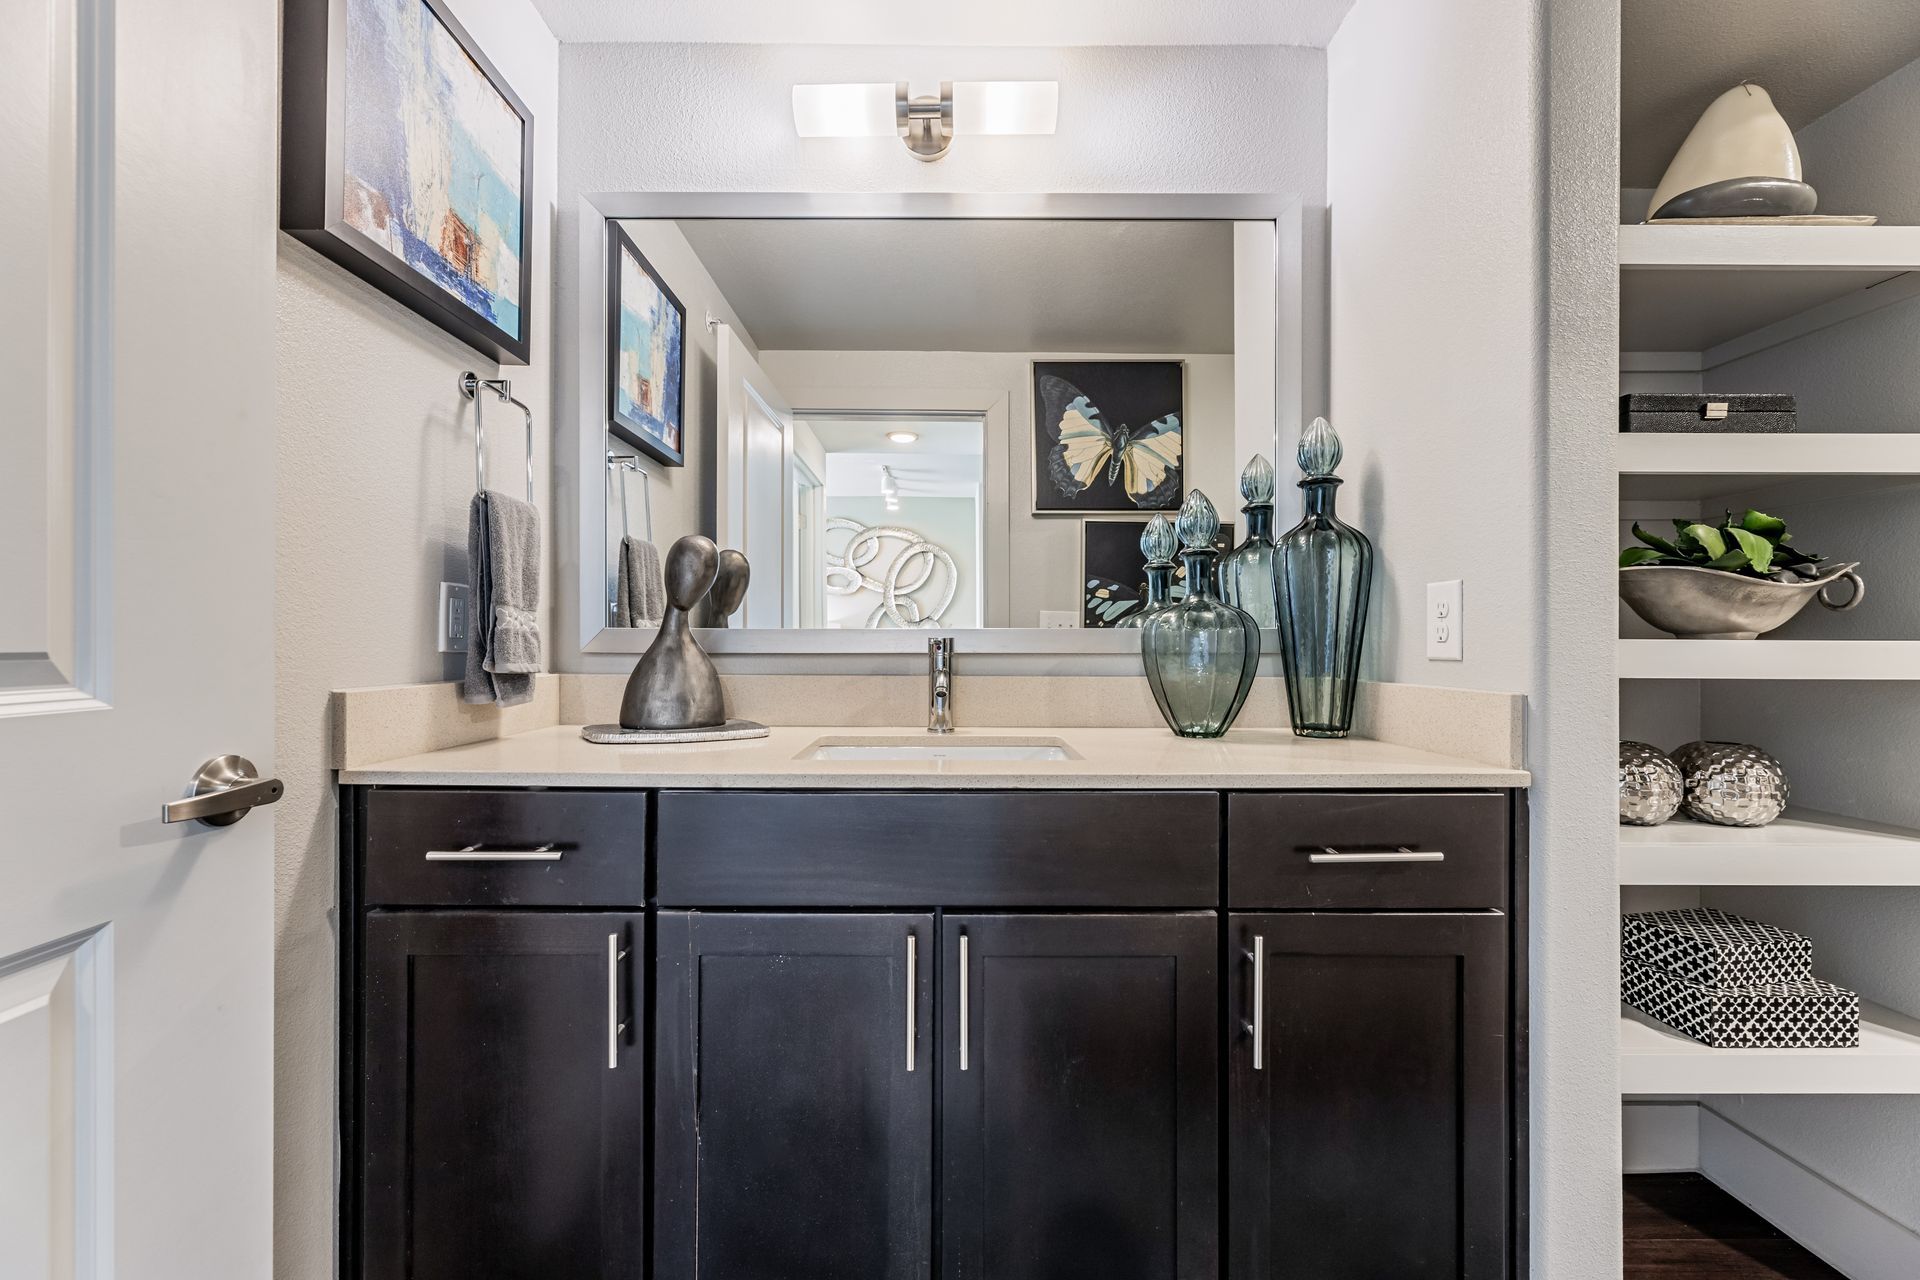 Apartment bathroom with a sink, mirror, and cabinets for storage at Parkside at Craig Ranch.